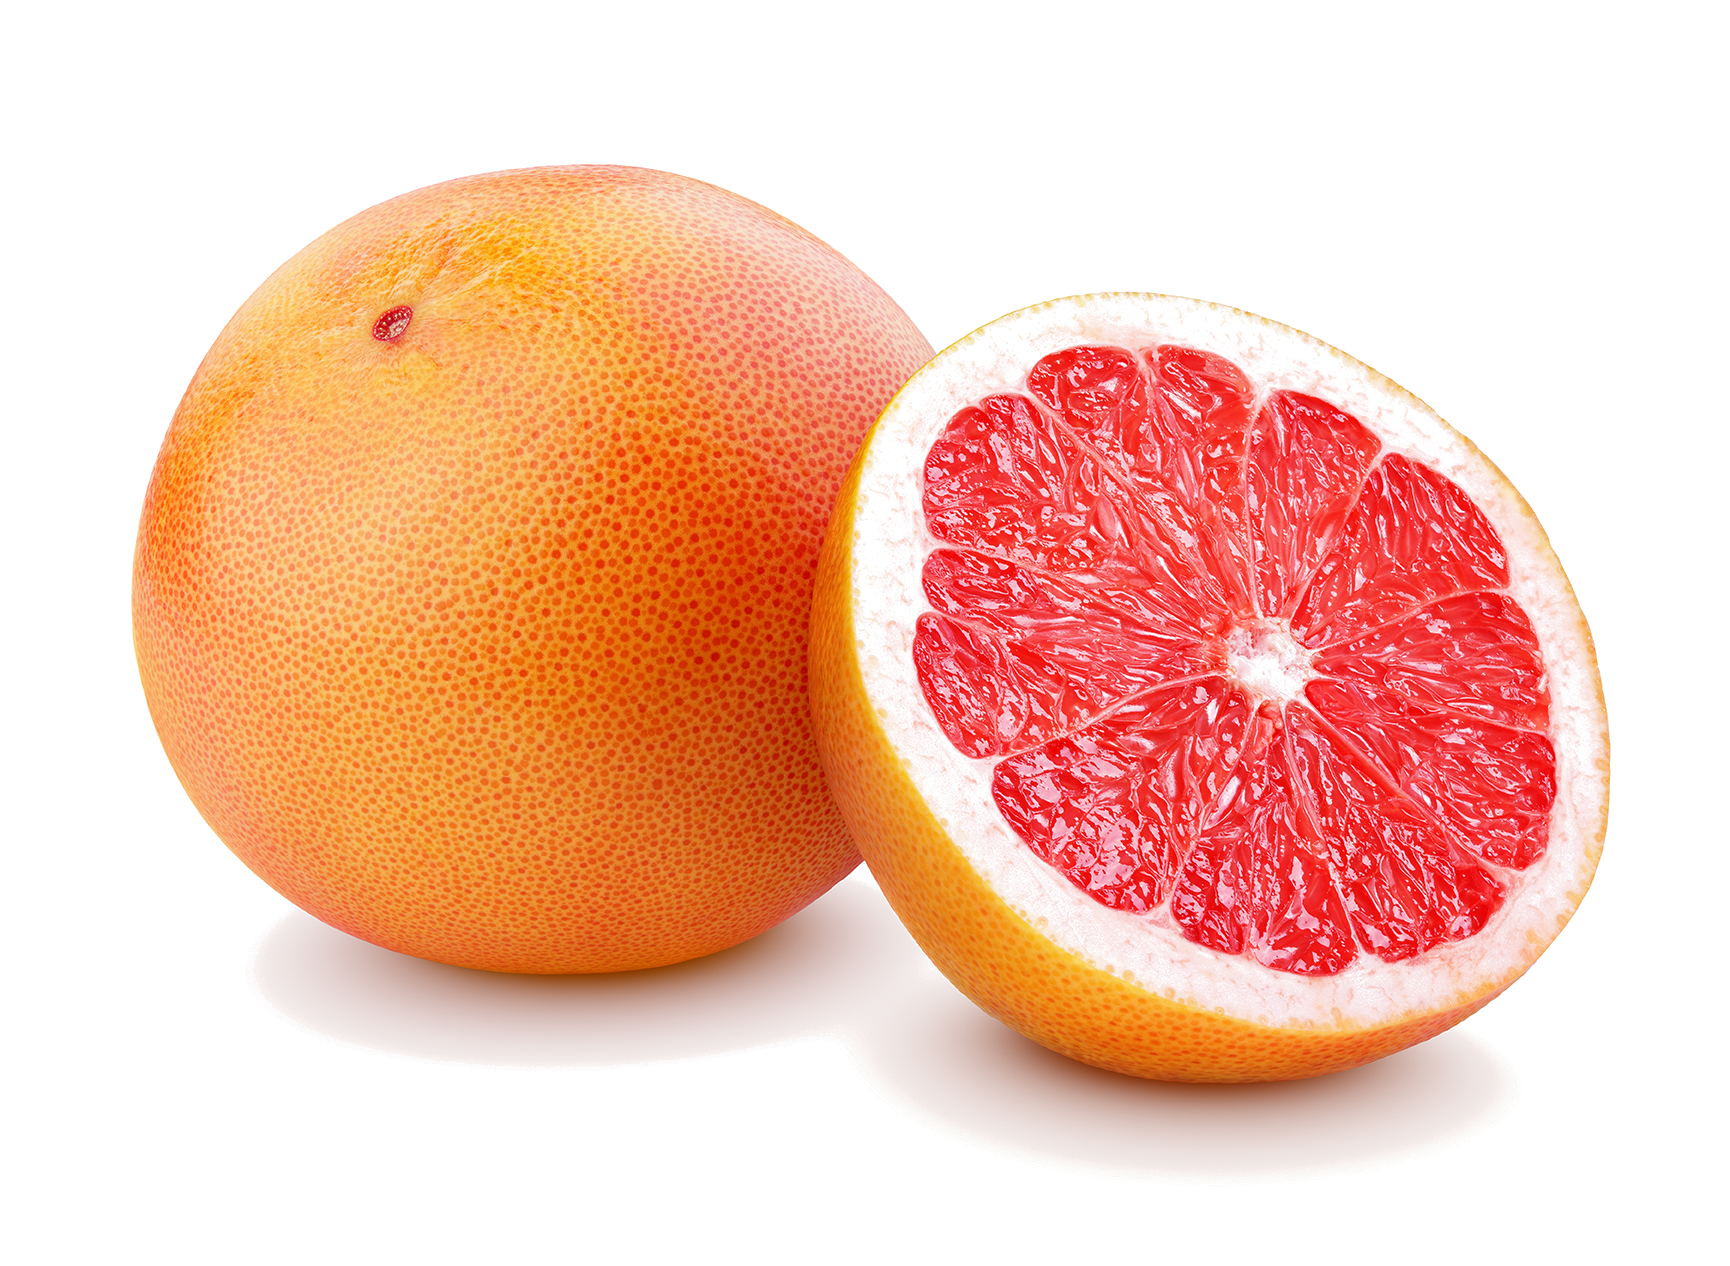 Pomelo star ruby-Flatten spherical shaped. Its thick peel is smooth and once it reaches its perfect ripening point, it turns pink.